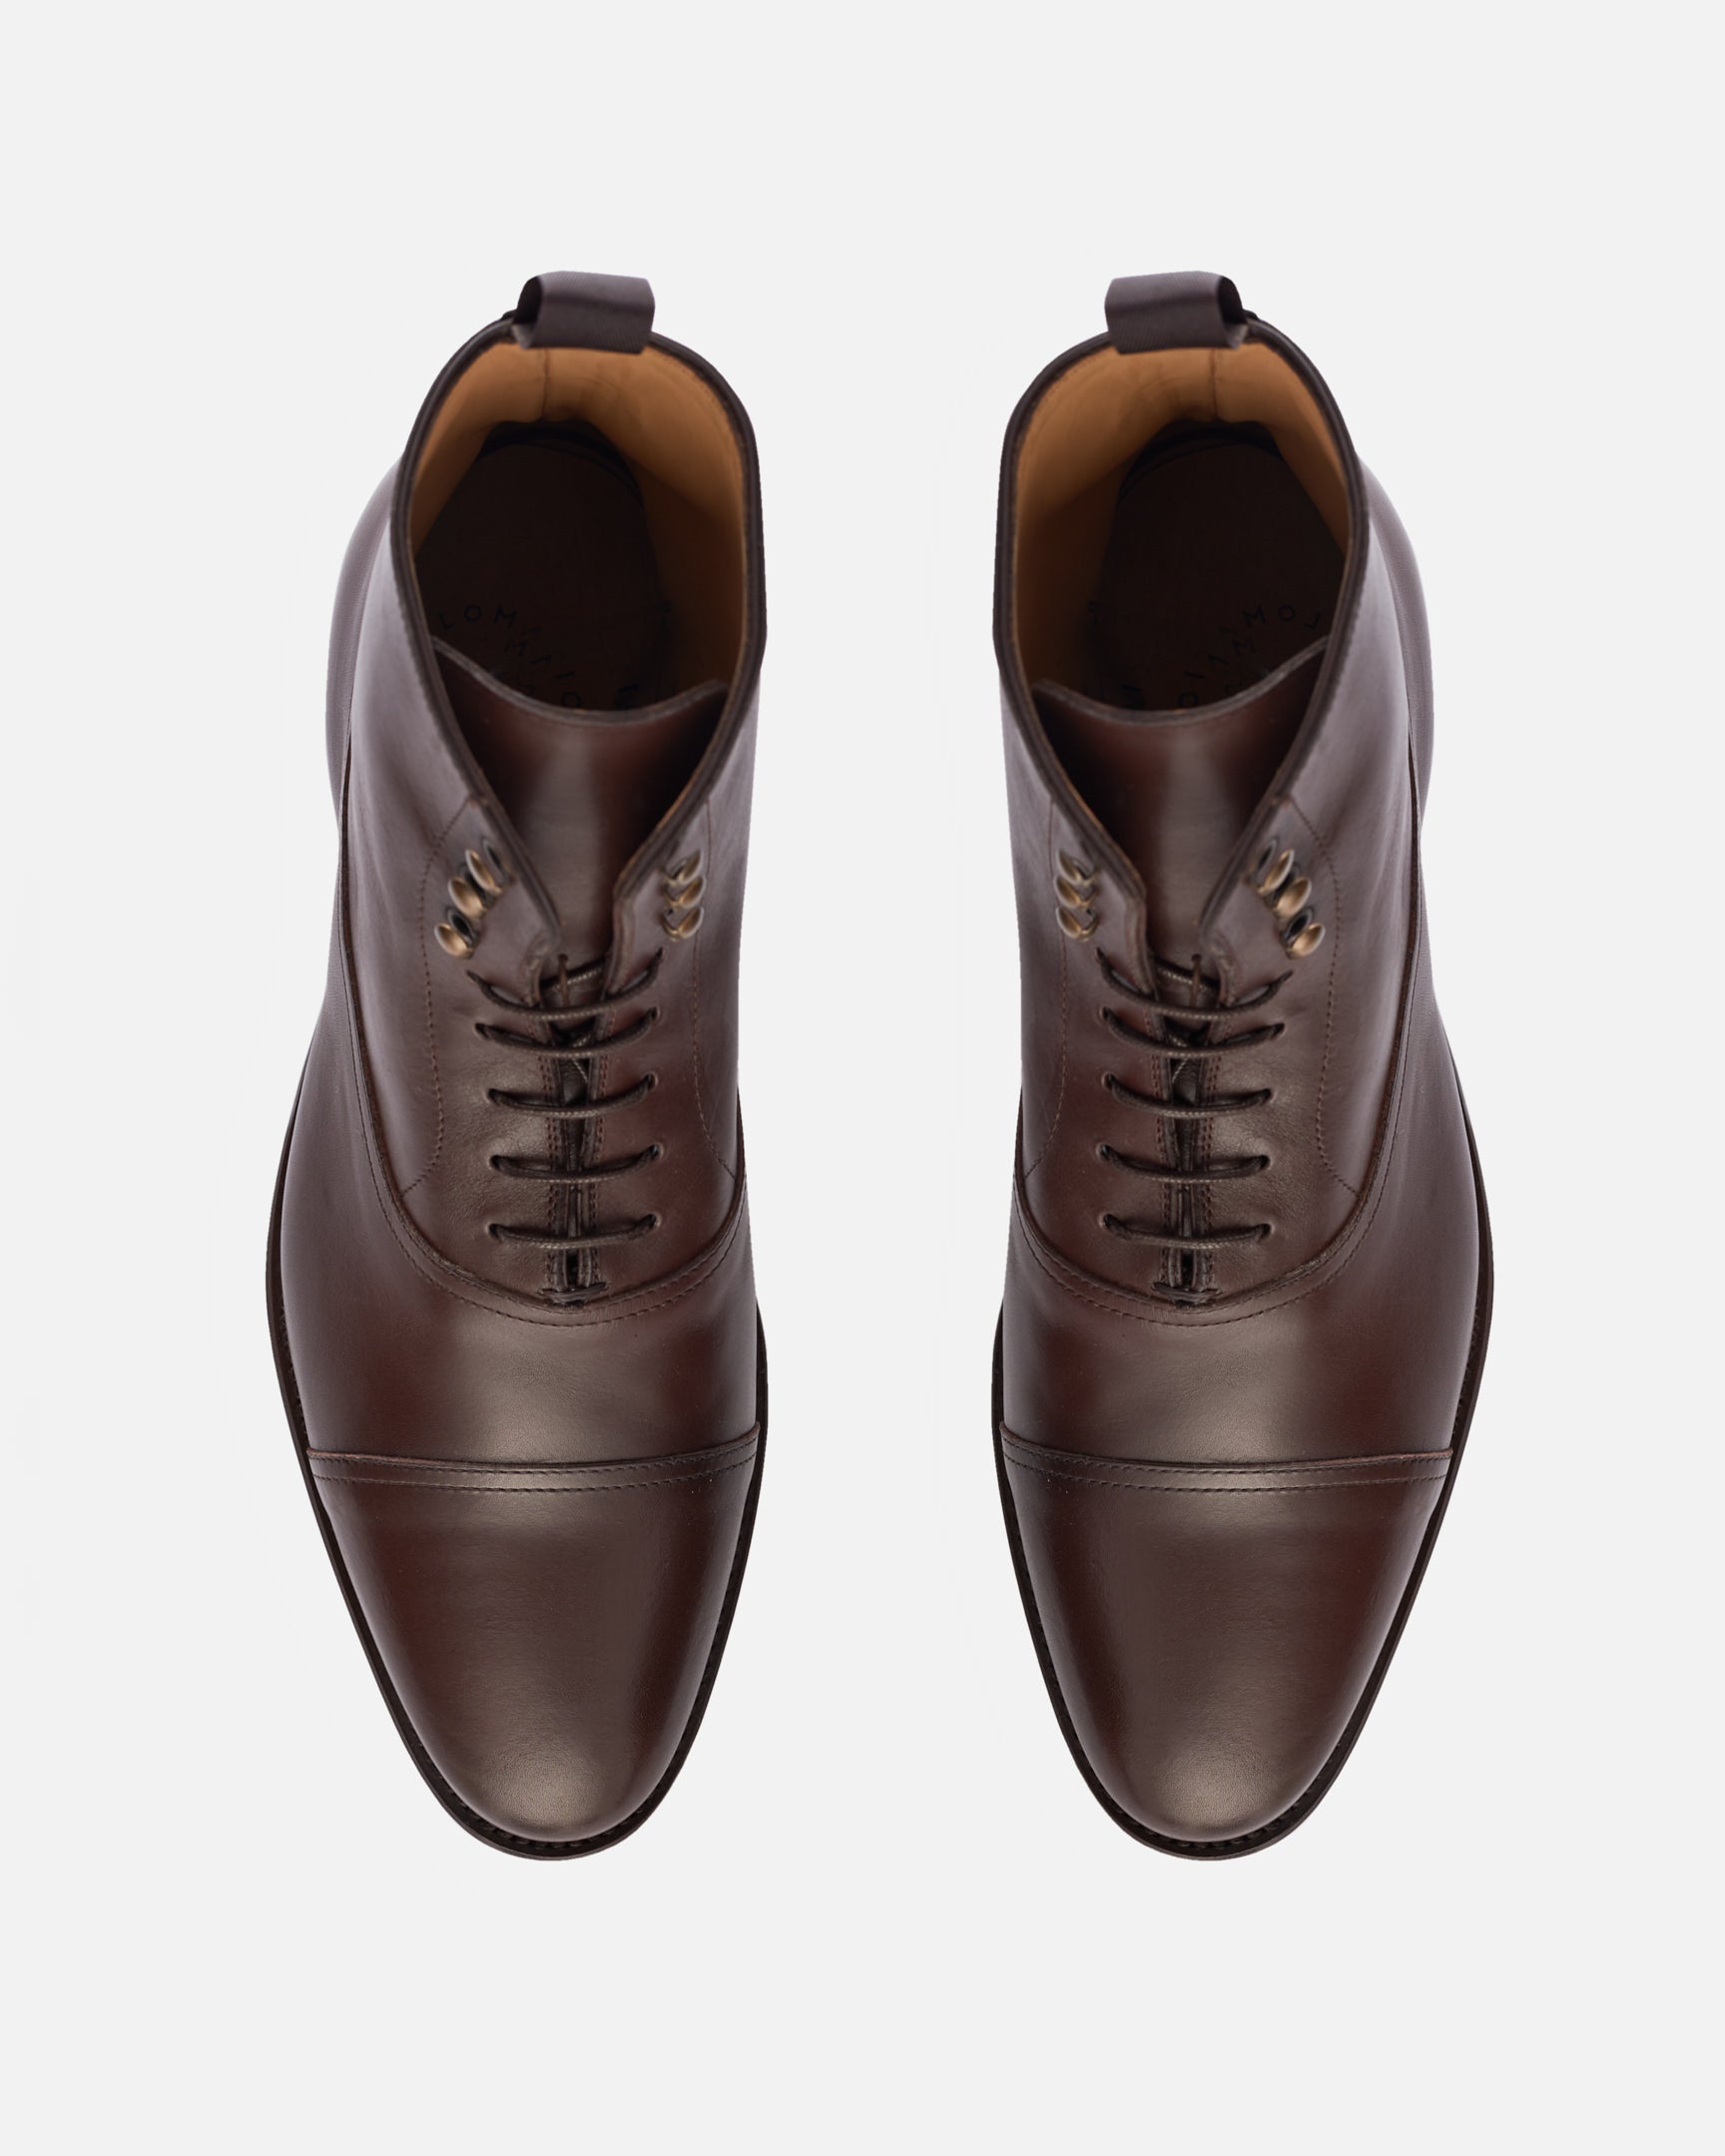 Pontevedra Brown Chateaubriand Calf